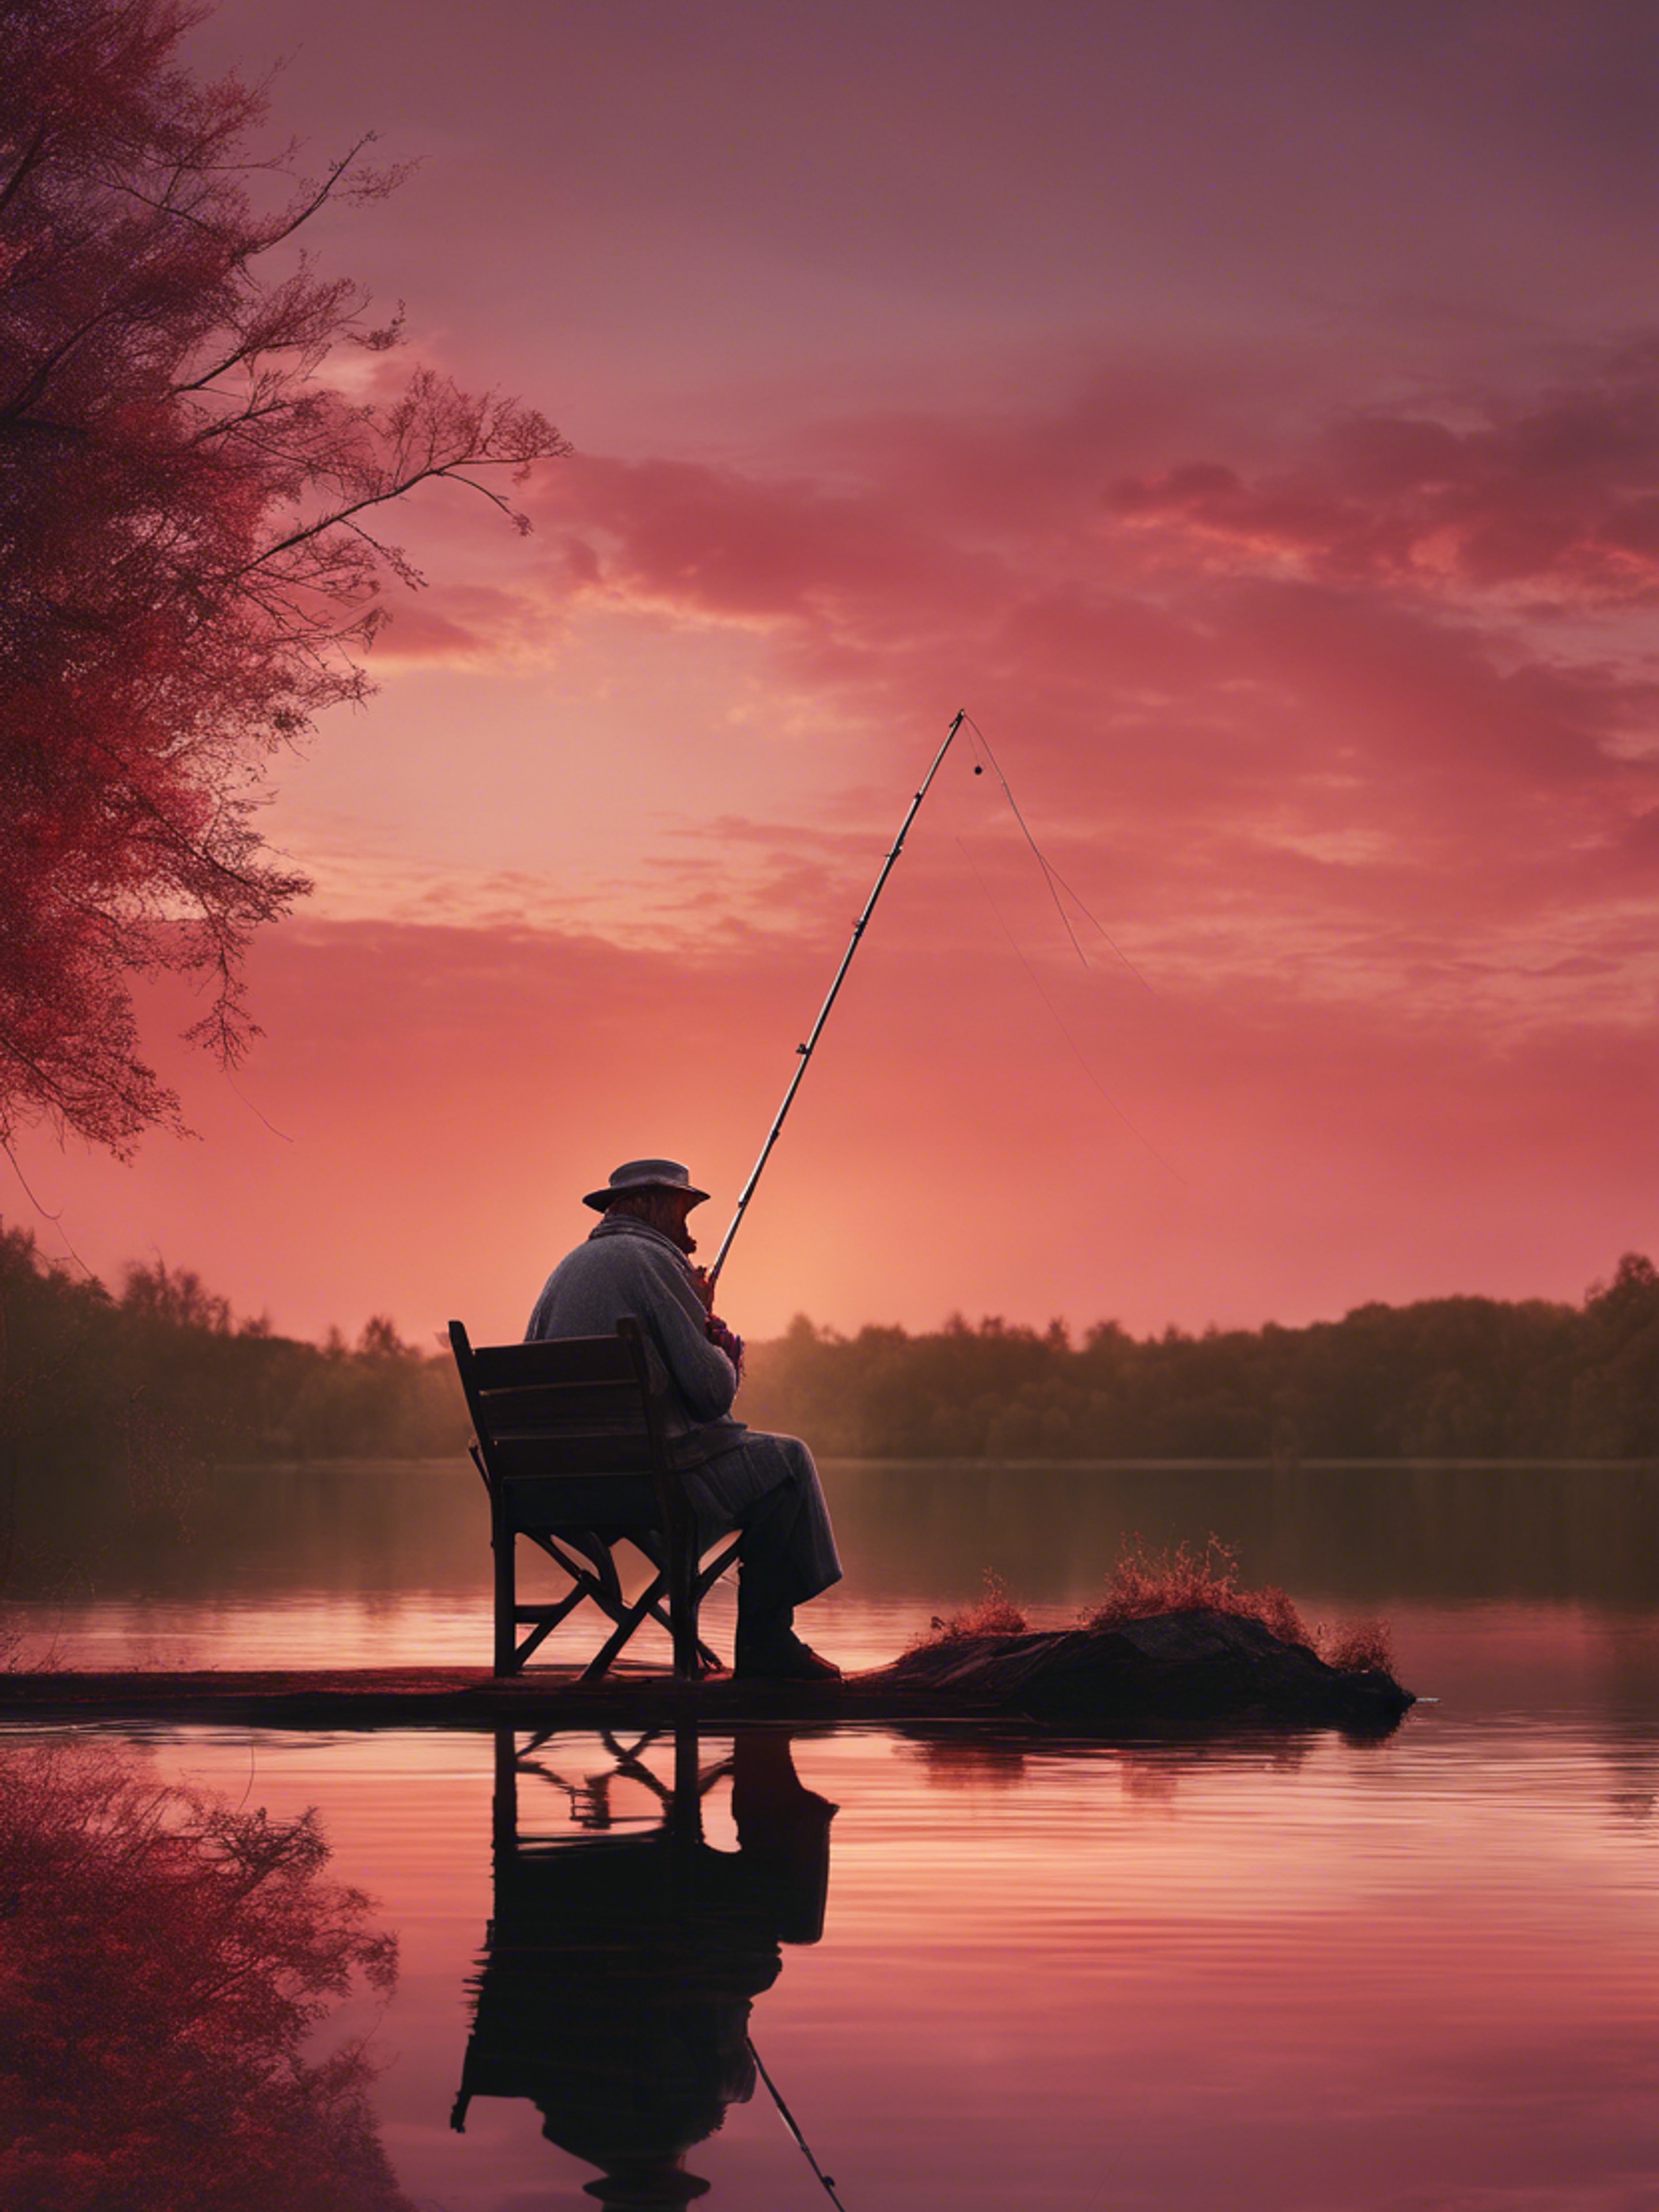 An old man maintaining a lonely vigil beside a lake under a ruby-red sunset, a fishing rod in his hand. Papel de parede[4b1db37a85dd45b294cb]